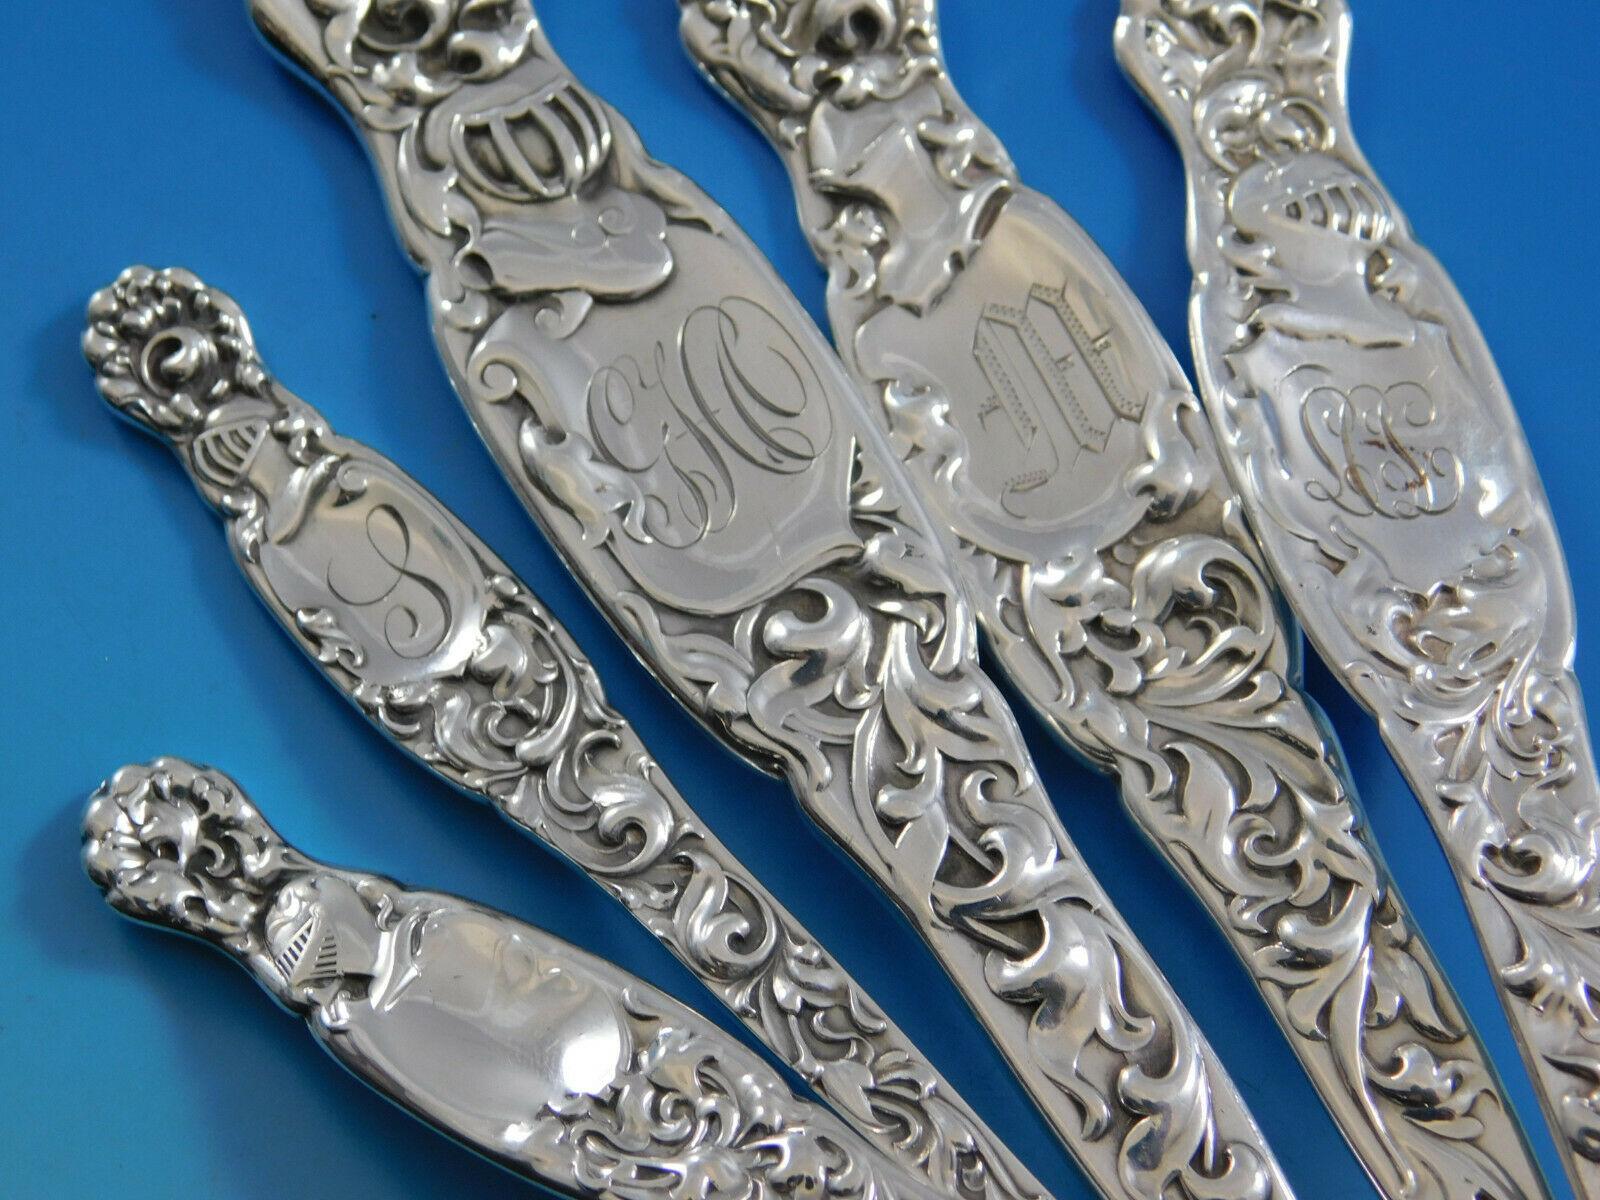 Heraldic by Whiting Sterling Silver Flatware Set 12 Service 135 Pieces Dinner 1